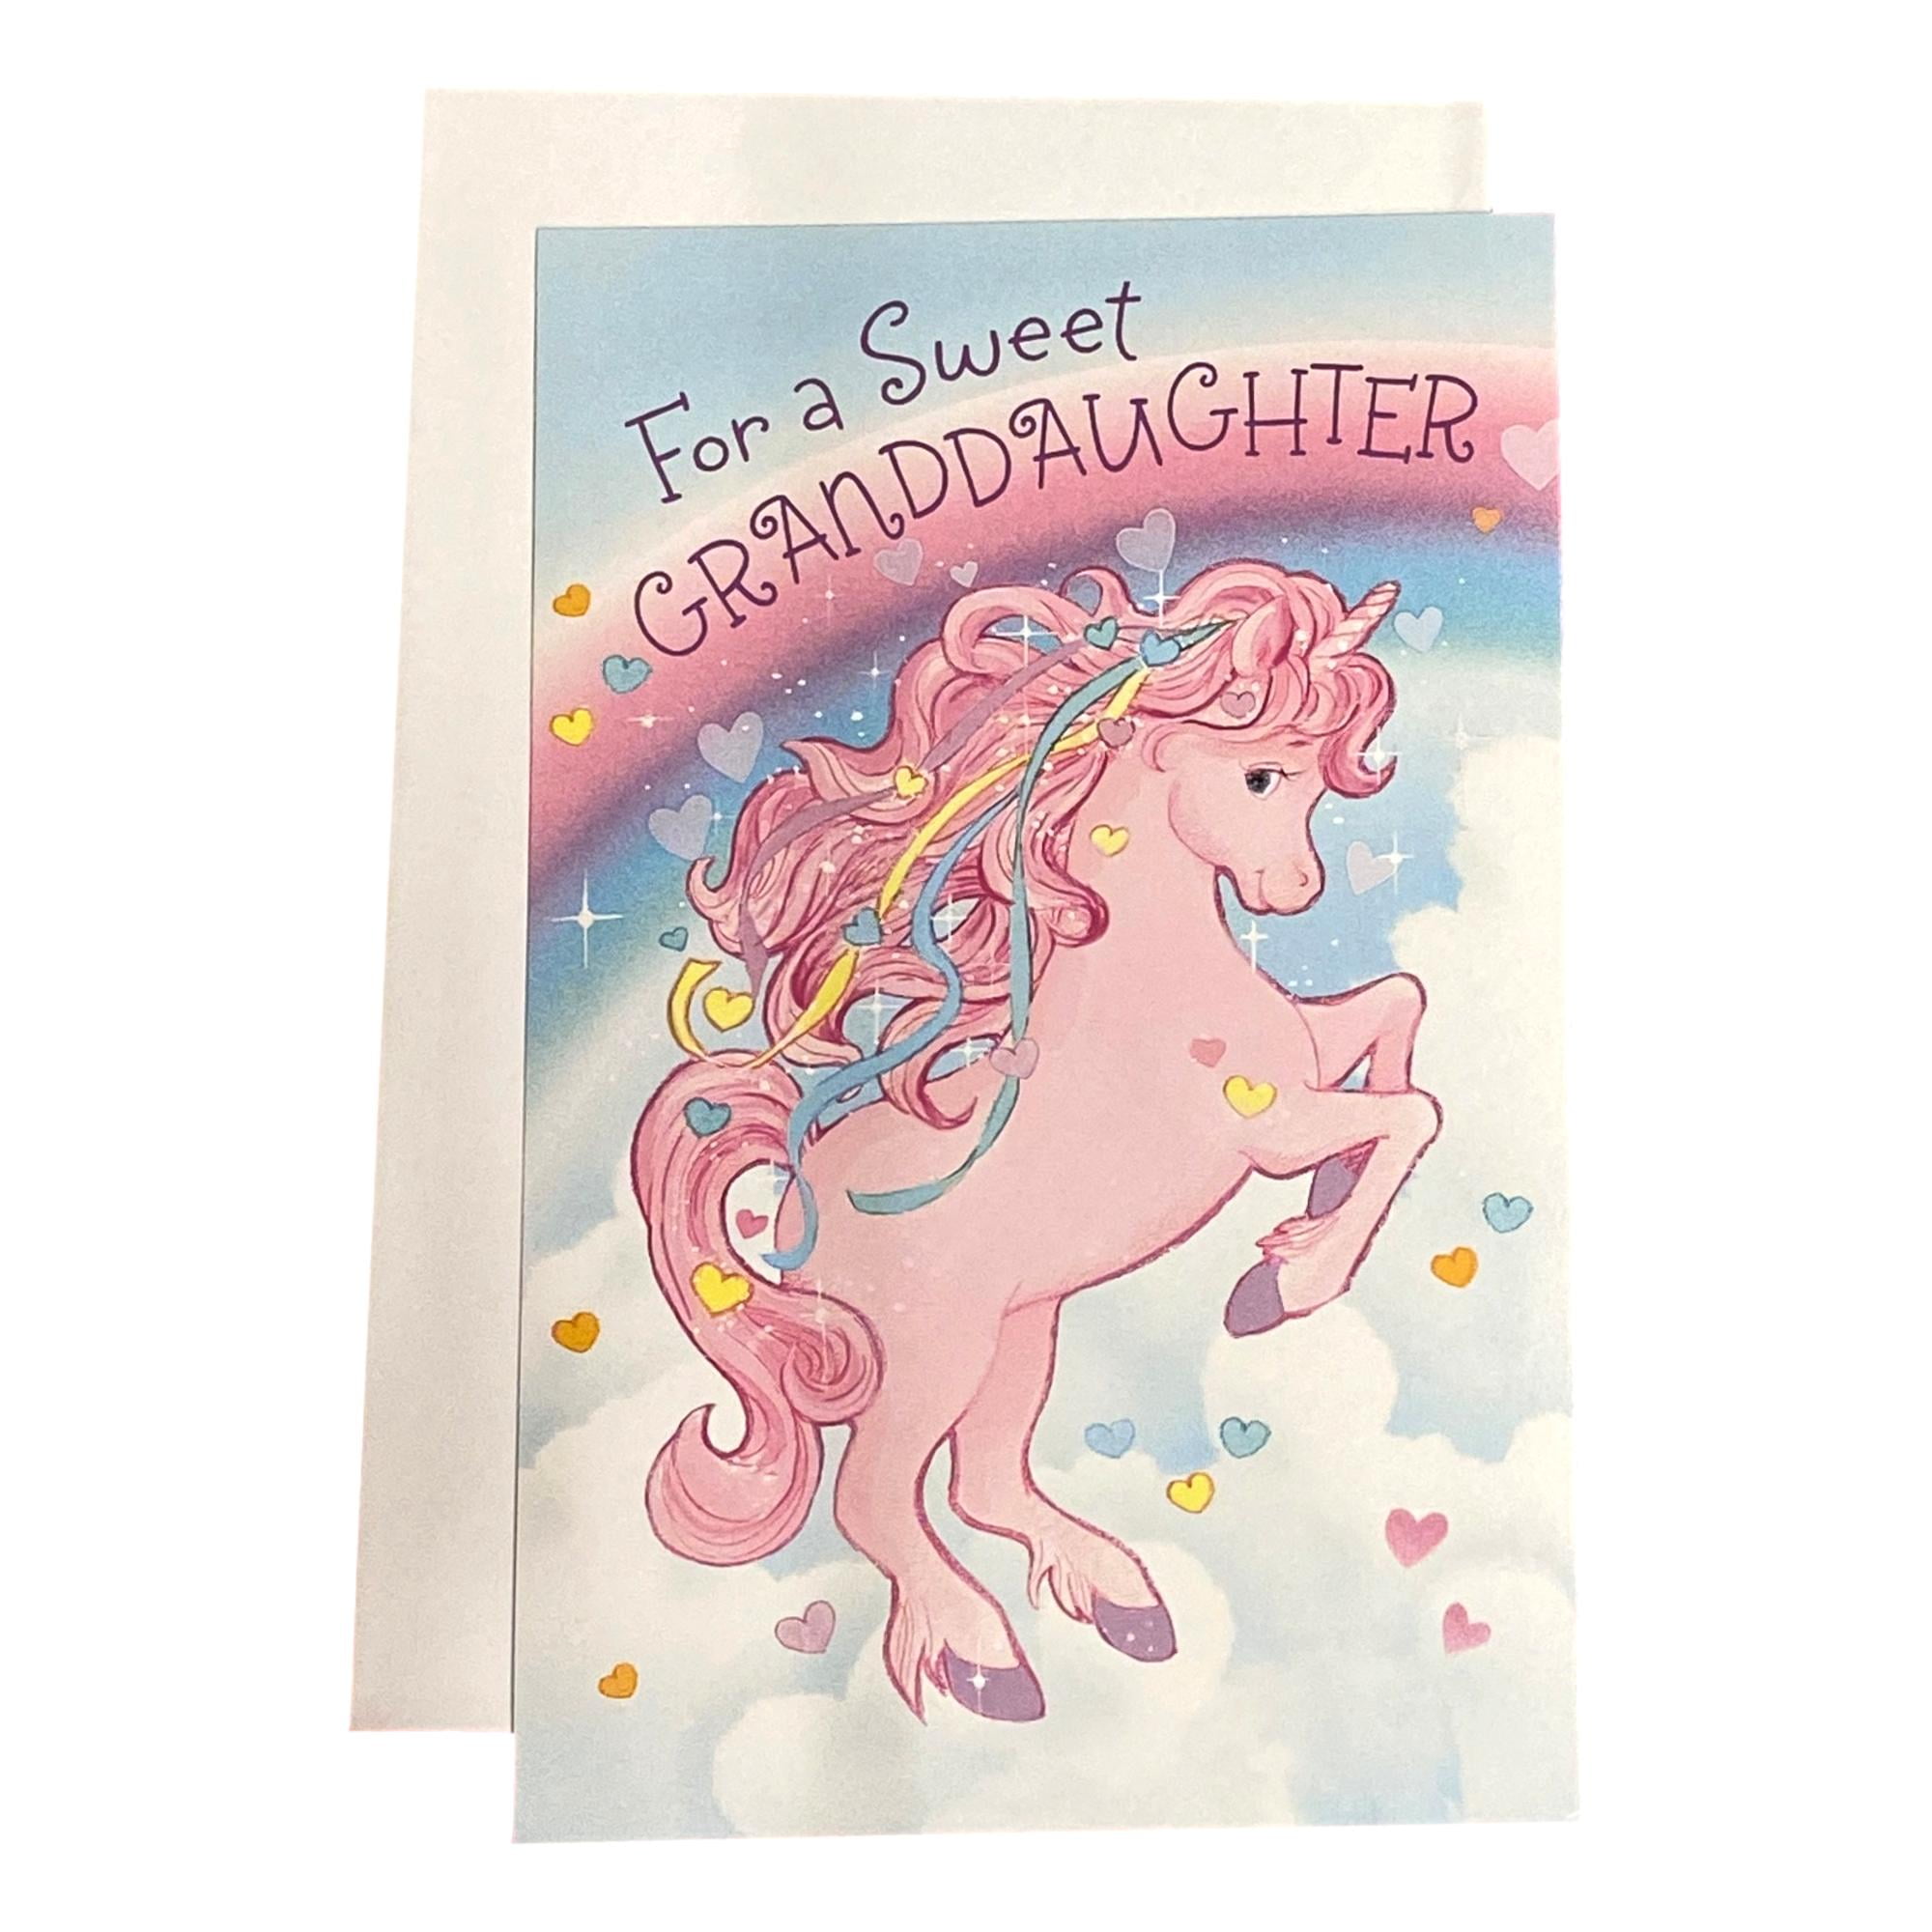 FOR YOU GRANDDAUGHTER WITH LOVE GRANDDAUGHTER UNICORN BIRTHDAY CARD 